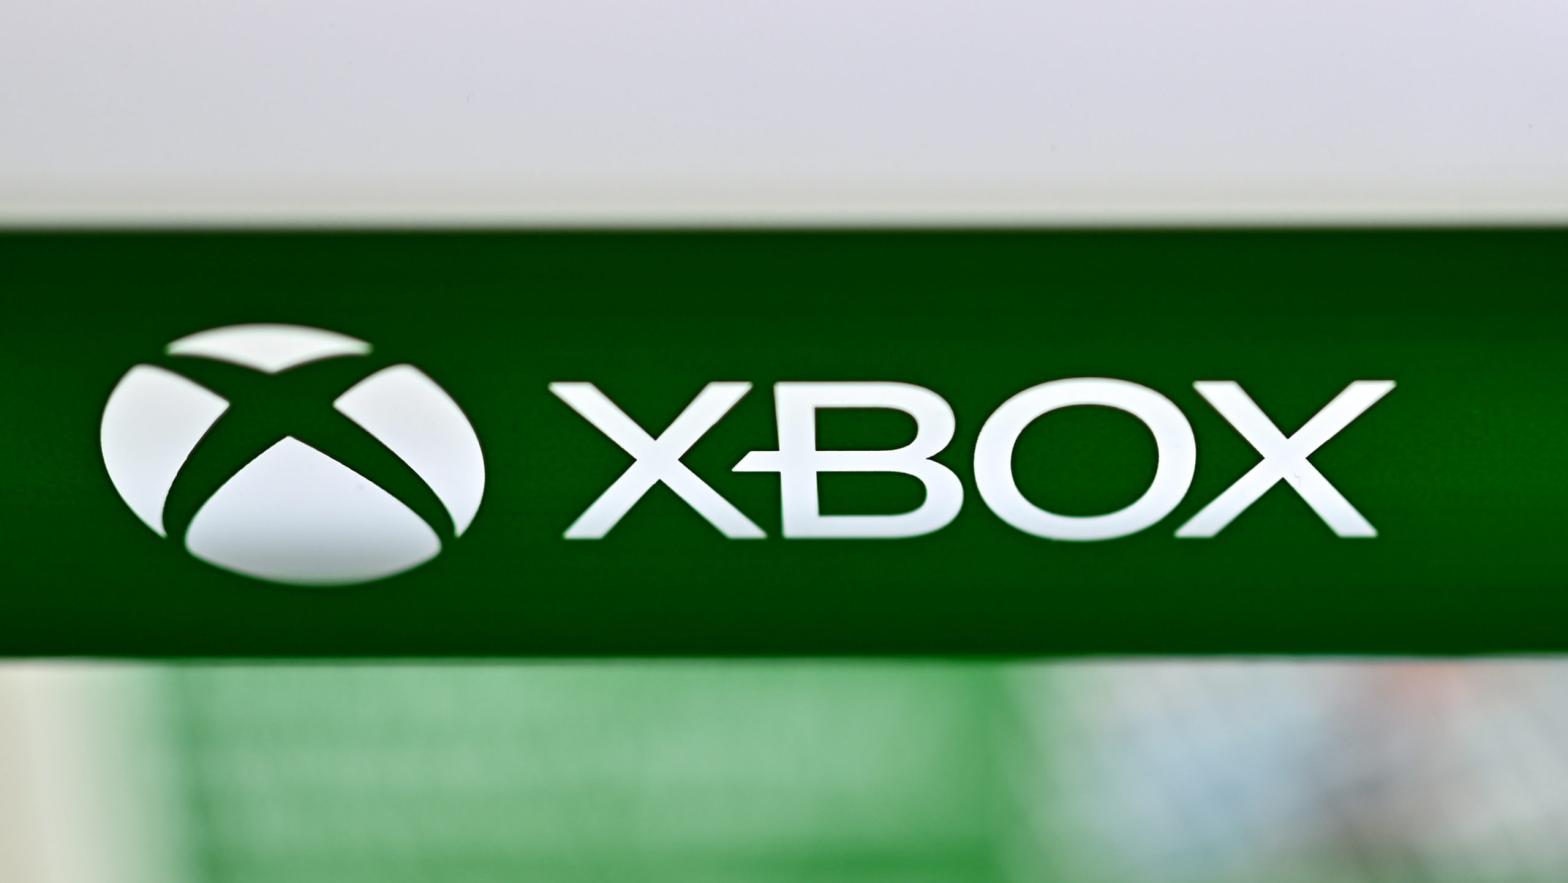 Microsoft's Xbox logo is seen during the worldwide release of the Xbox Series X gaming console at an electronics store in Tokyo on November 10, 2020.  (Photo: Charly Triballeau / AFP, Getty Images)